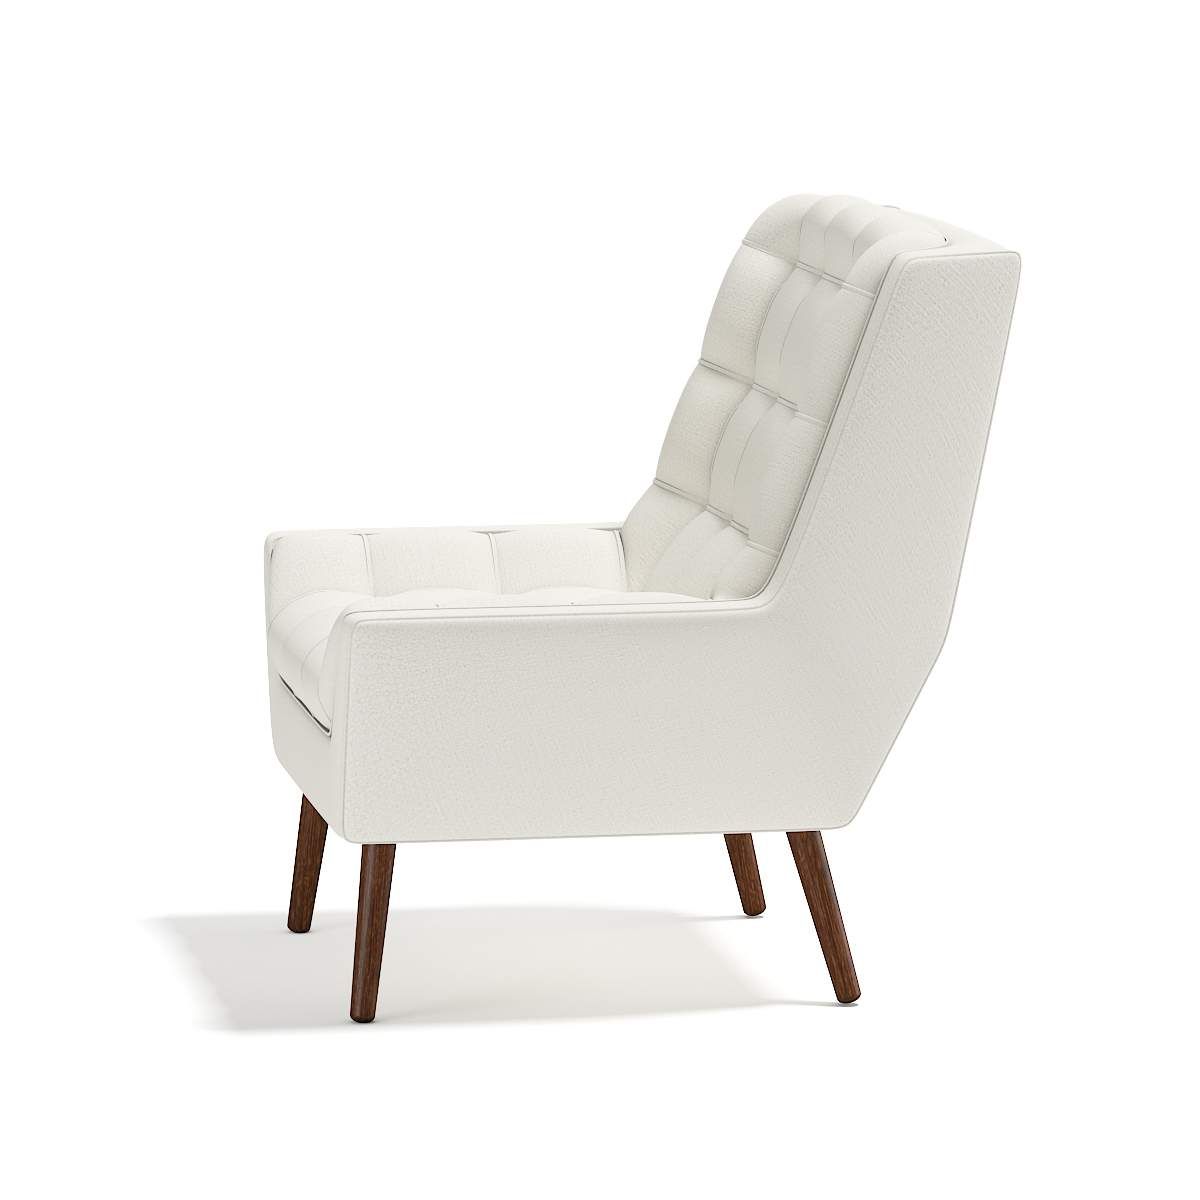 White Fabric Outdoor Wicker Armchairs Pertaining To Fashionable White Fabric Armchair – Biscayne White Fabric Outdoor Wicker Armchair (View 7 of 15)